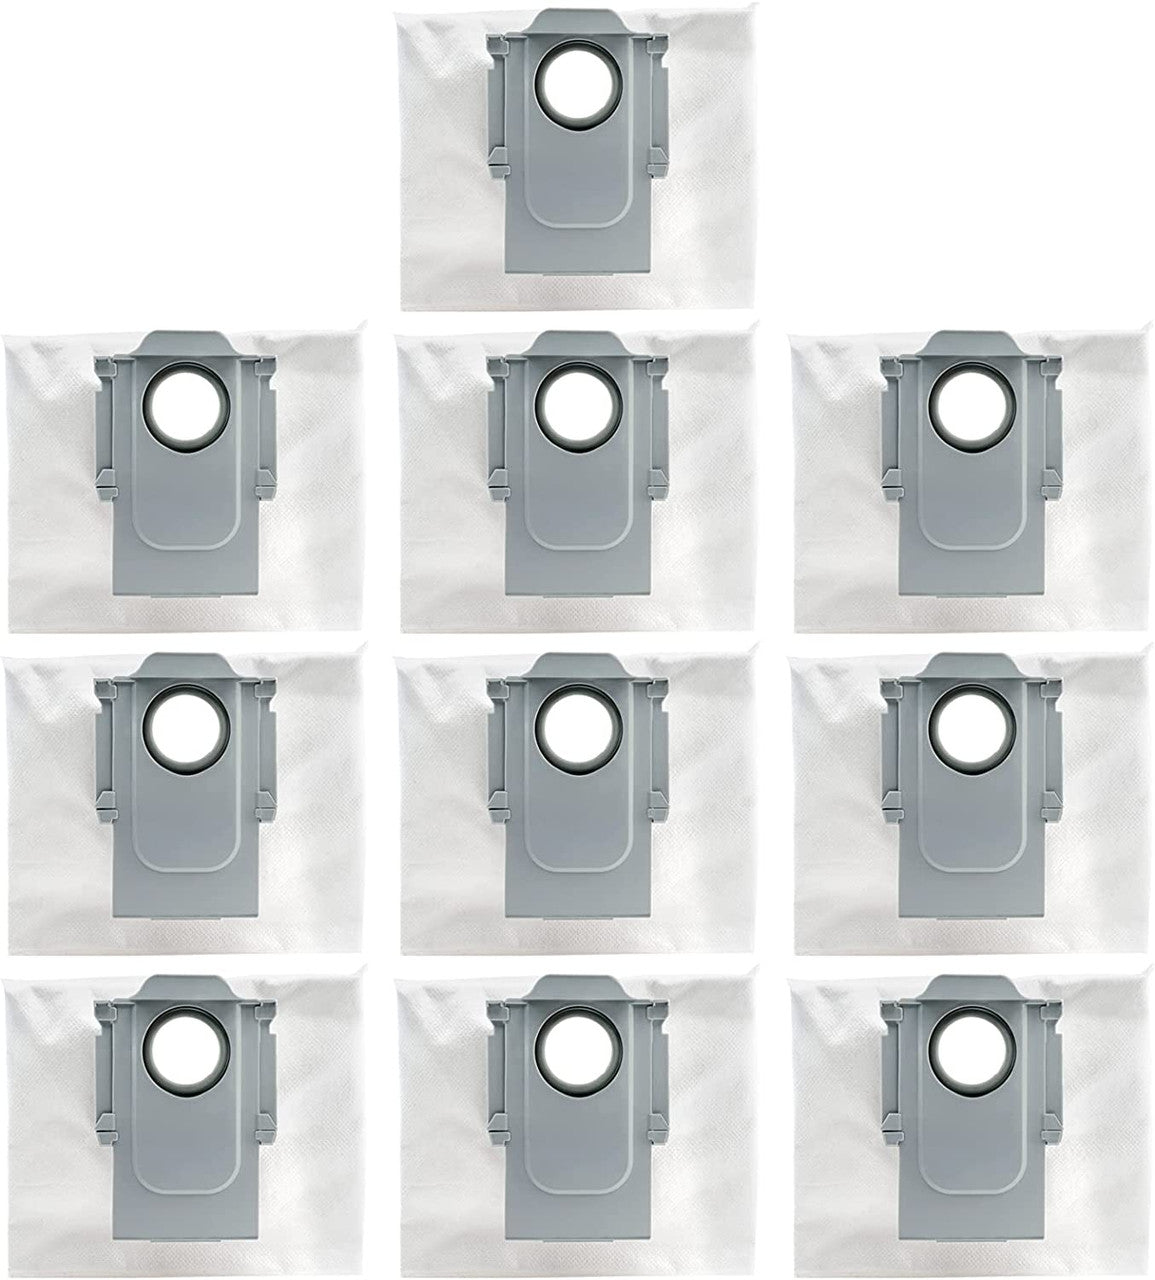 10 x Vacuum Bags for Roborock S7 MaxV Ultra, Q7 Max+, S8+, and S8 Pro Ultra